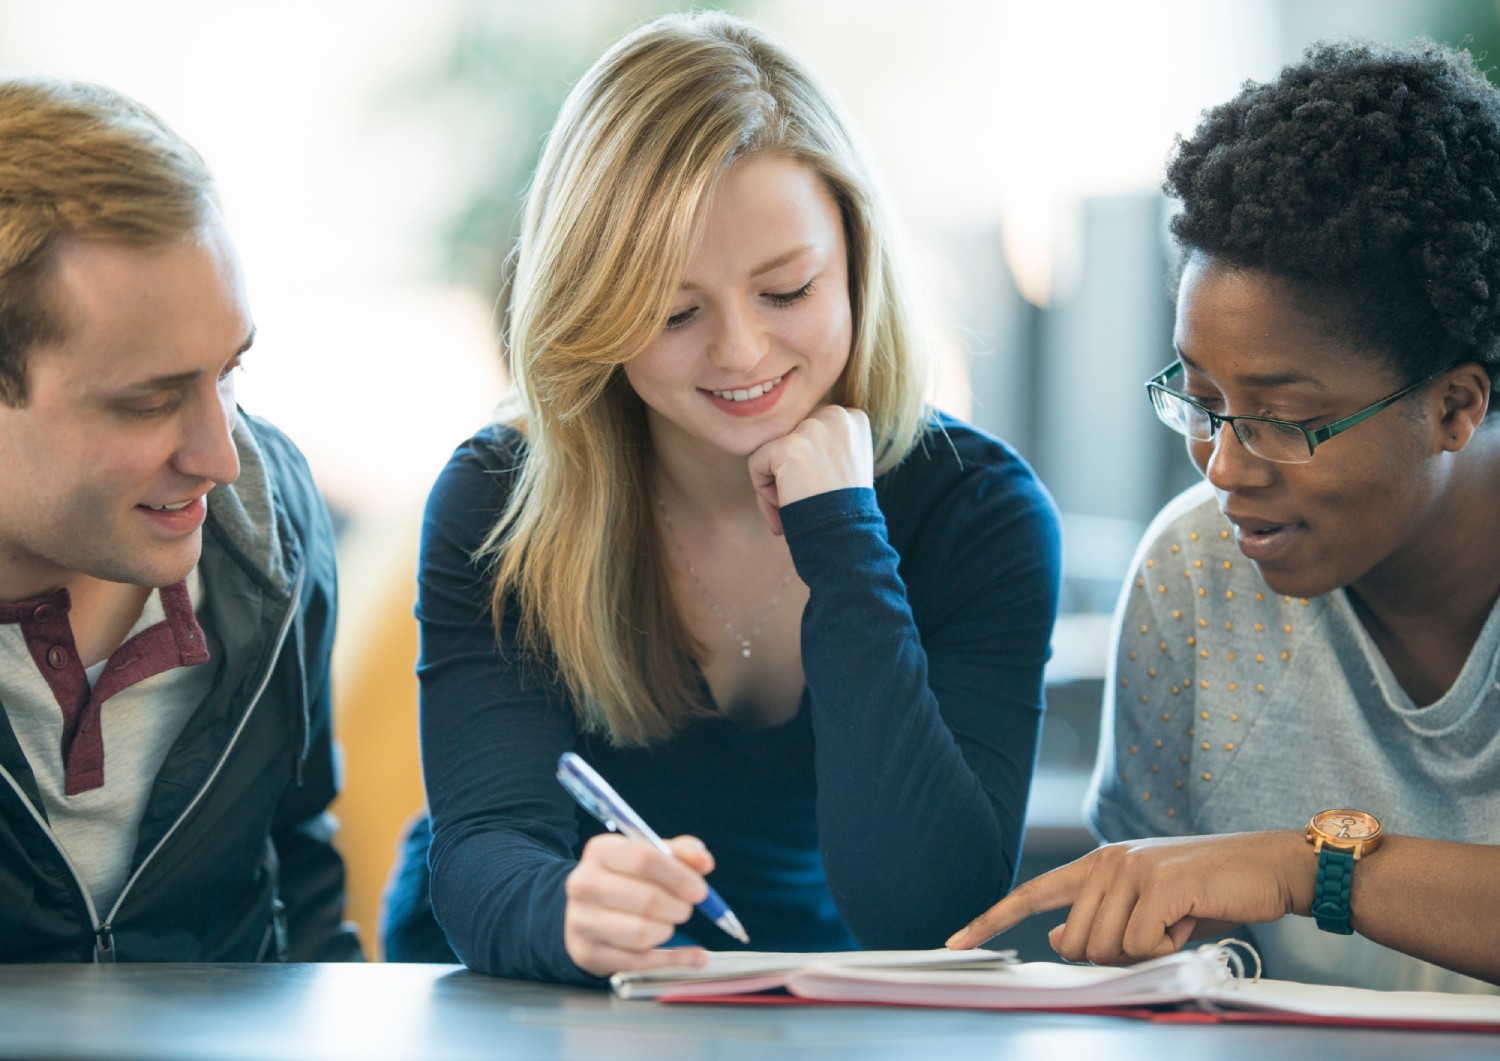 Three students sit on one side of a table studying. They are looking down at a notebook